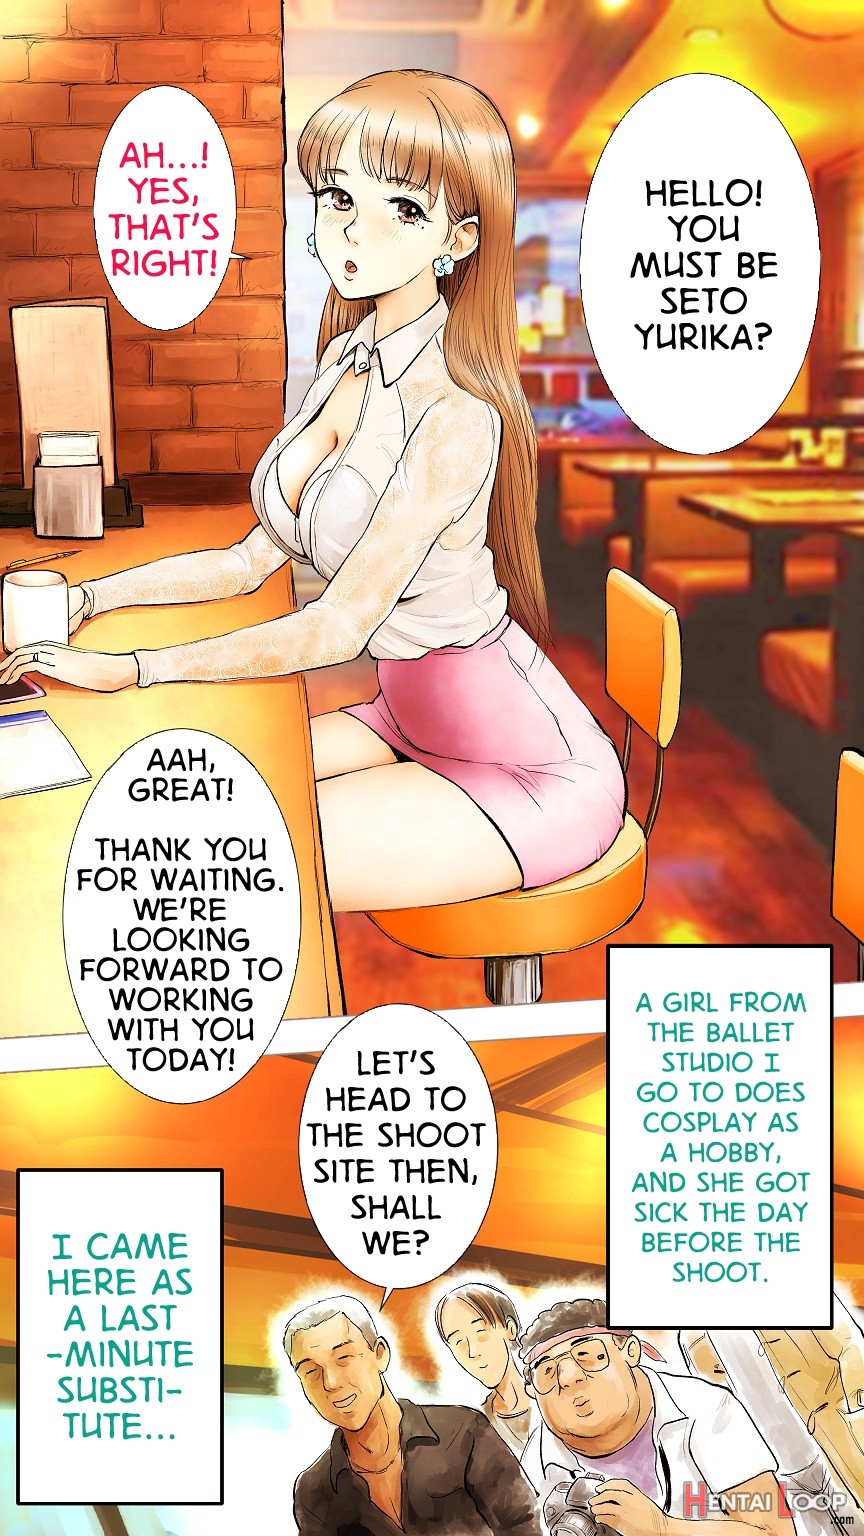 Hentai Story Porn - Read Porn-filming Story (by Aino) - Hentai doujinshi for free at HentaiLoop